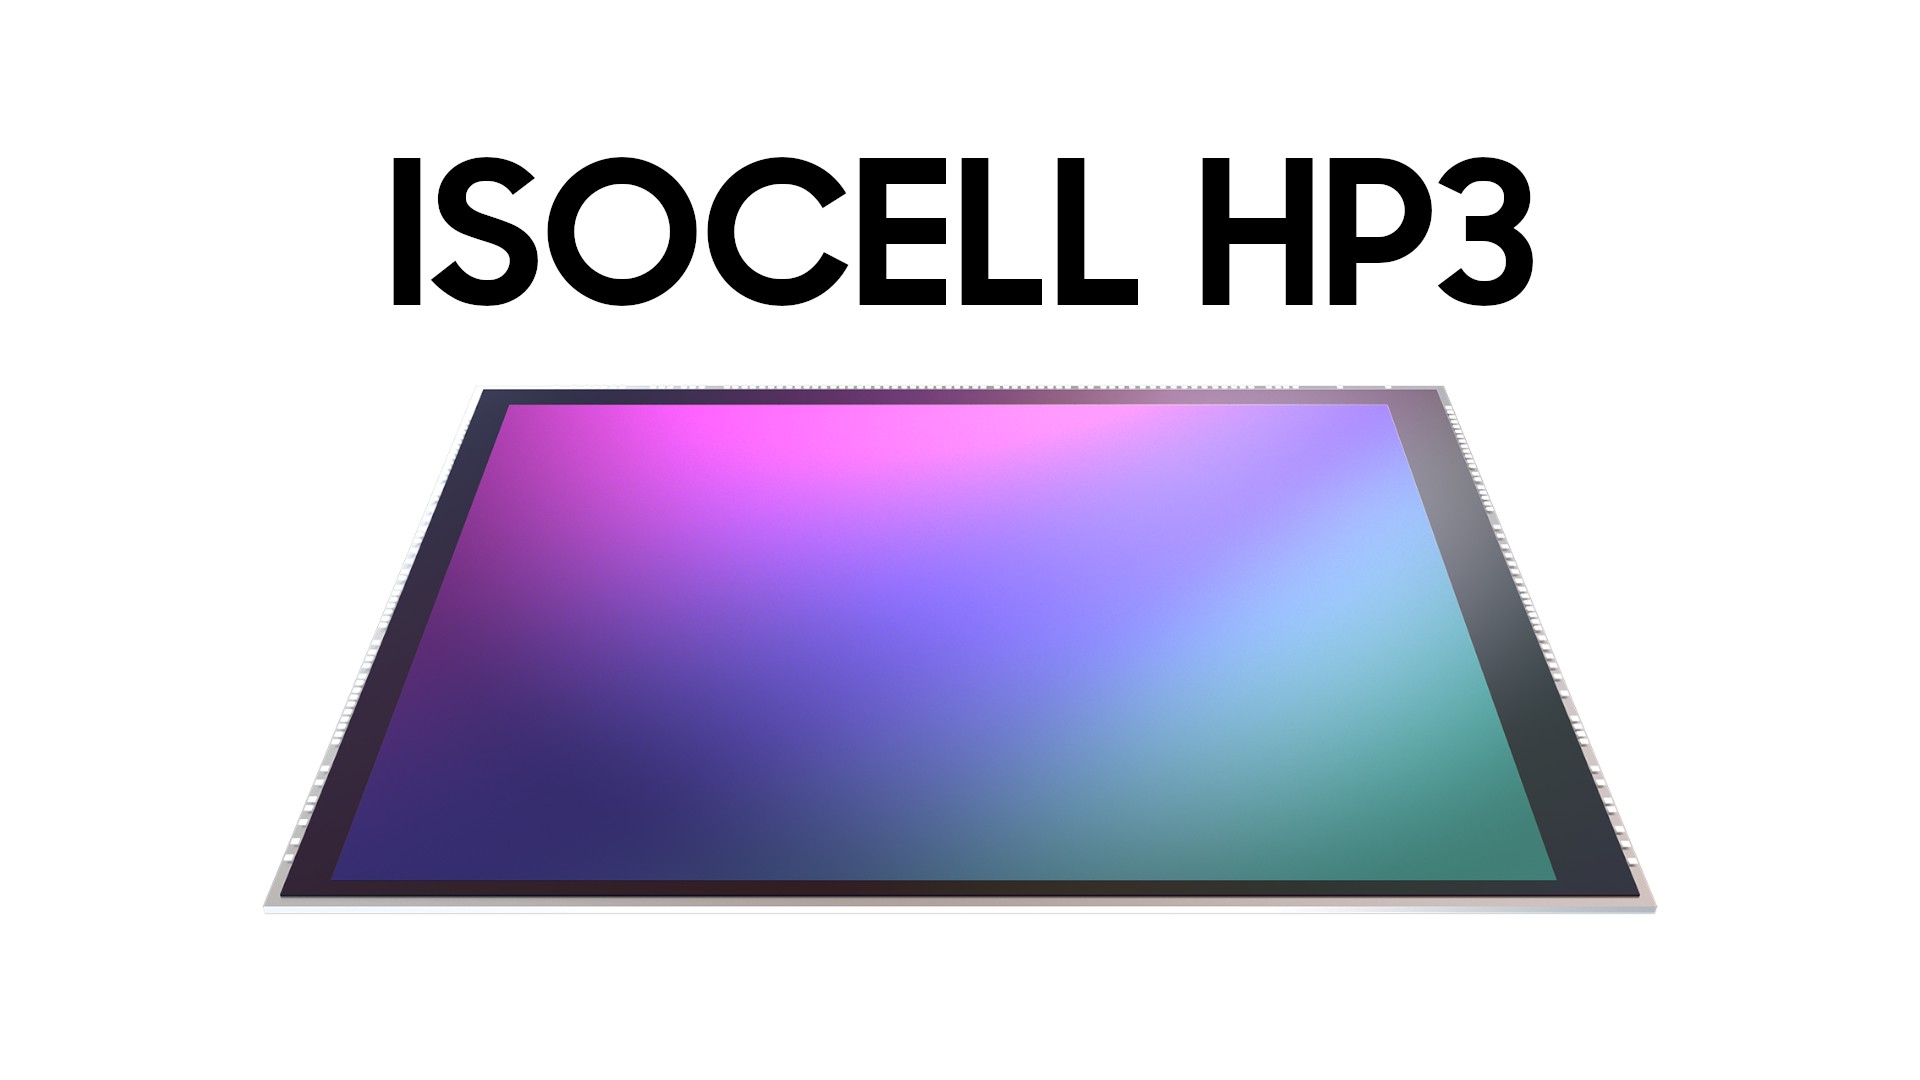 Samsung 200MP ISOCELL HP3